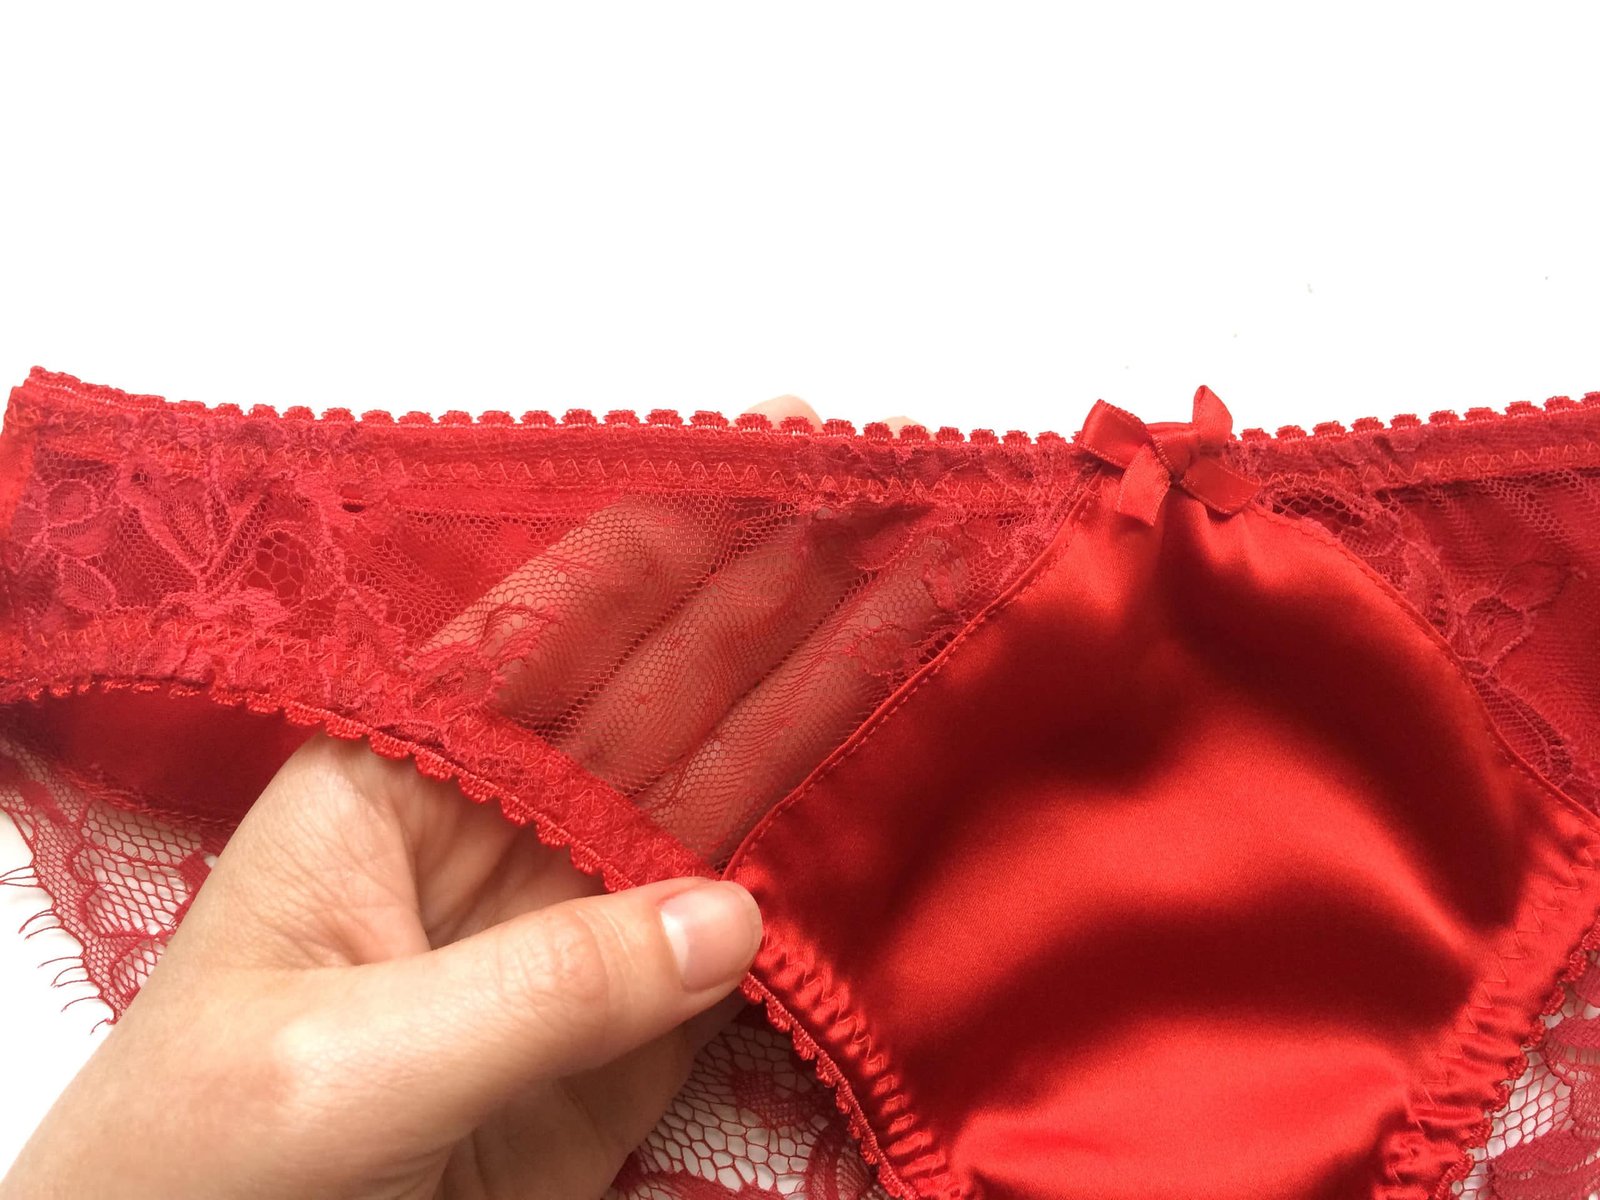 Red Lace Lingerie, Red Lace Knickers, Lace Panties, Red Panties, Red Lace  Panties 